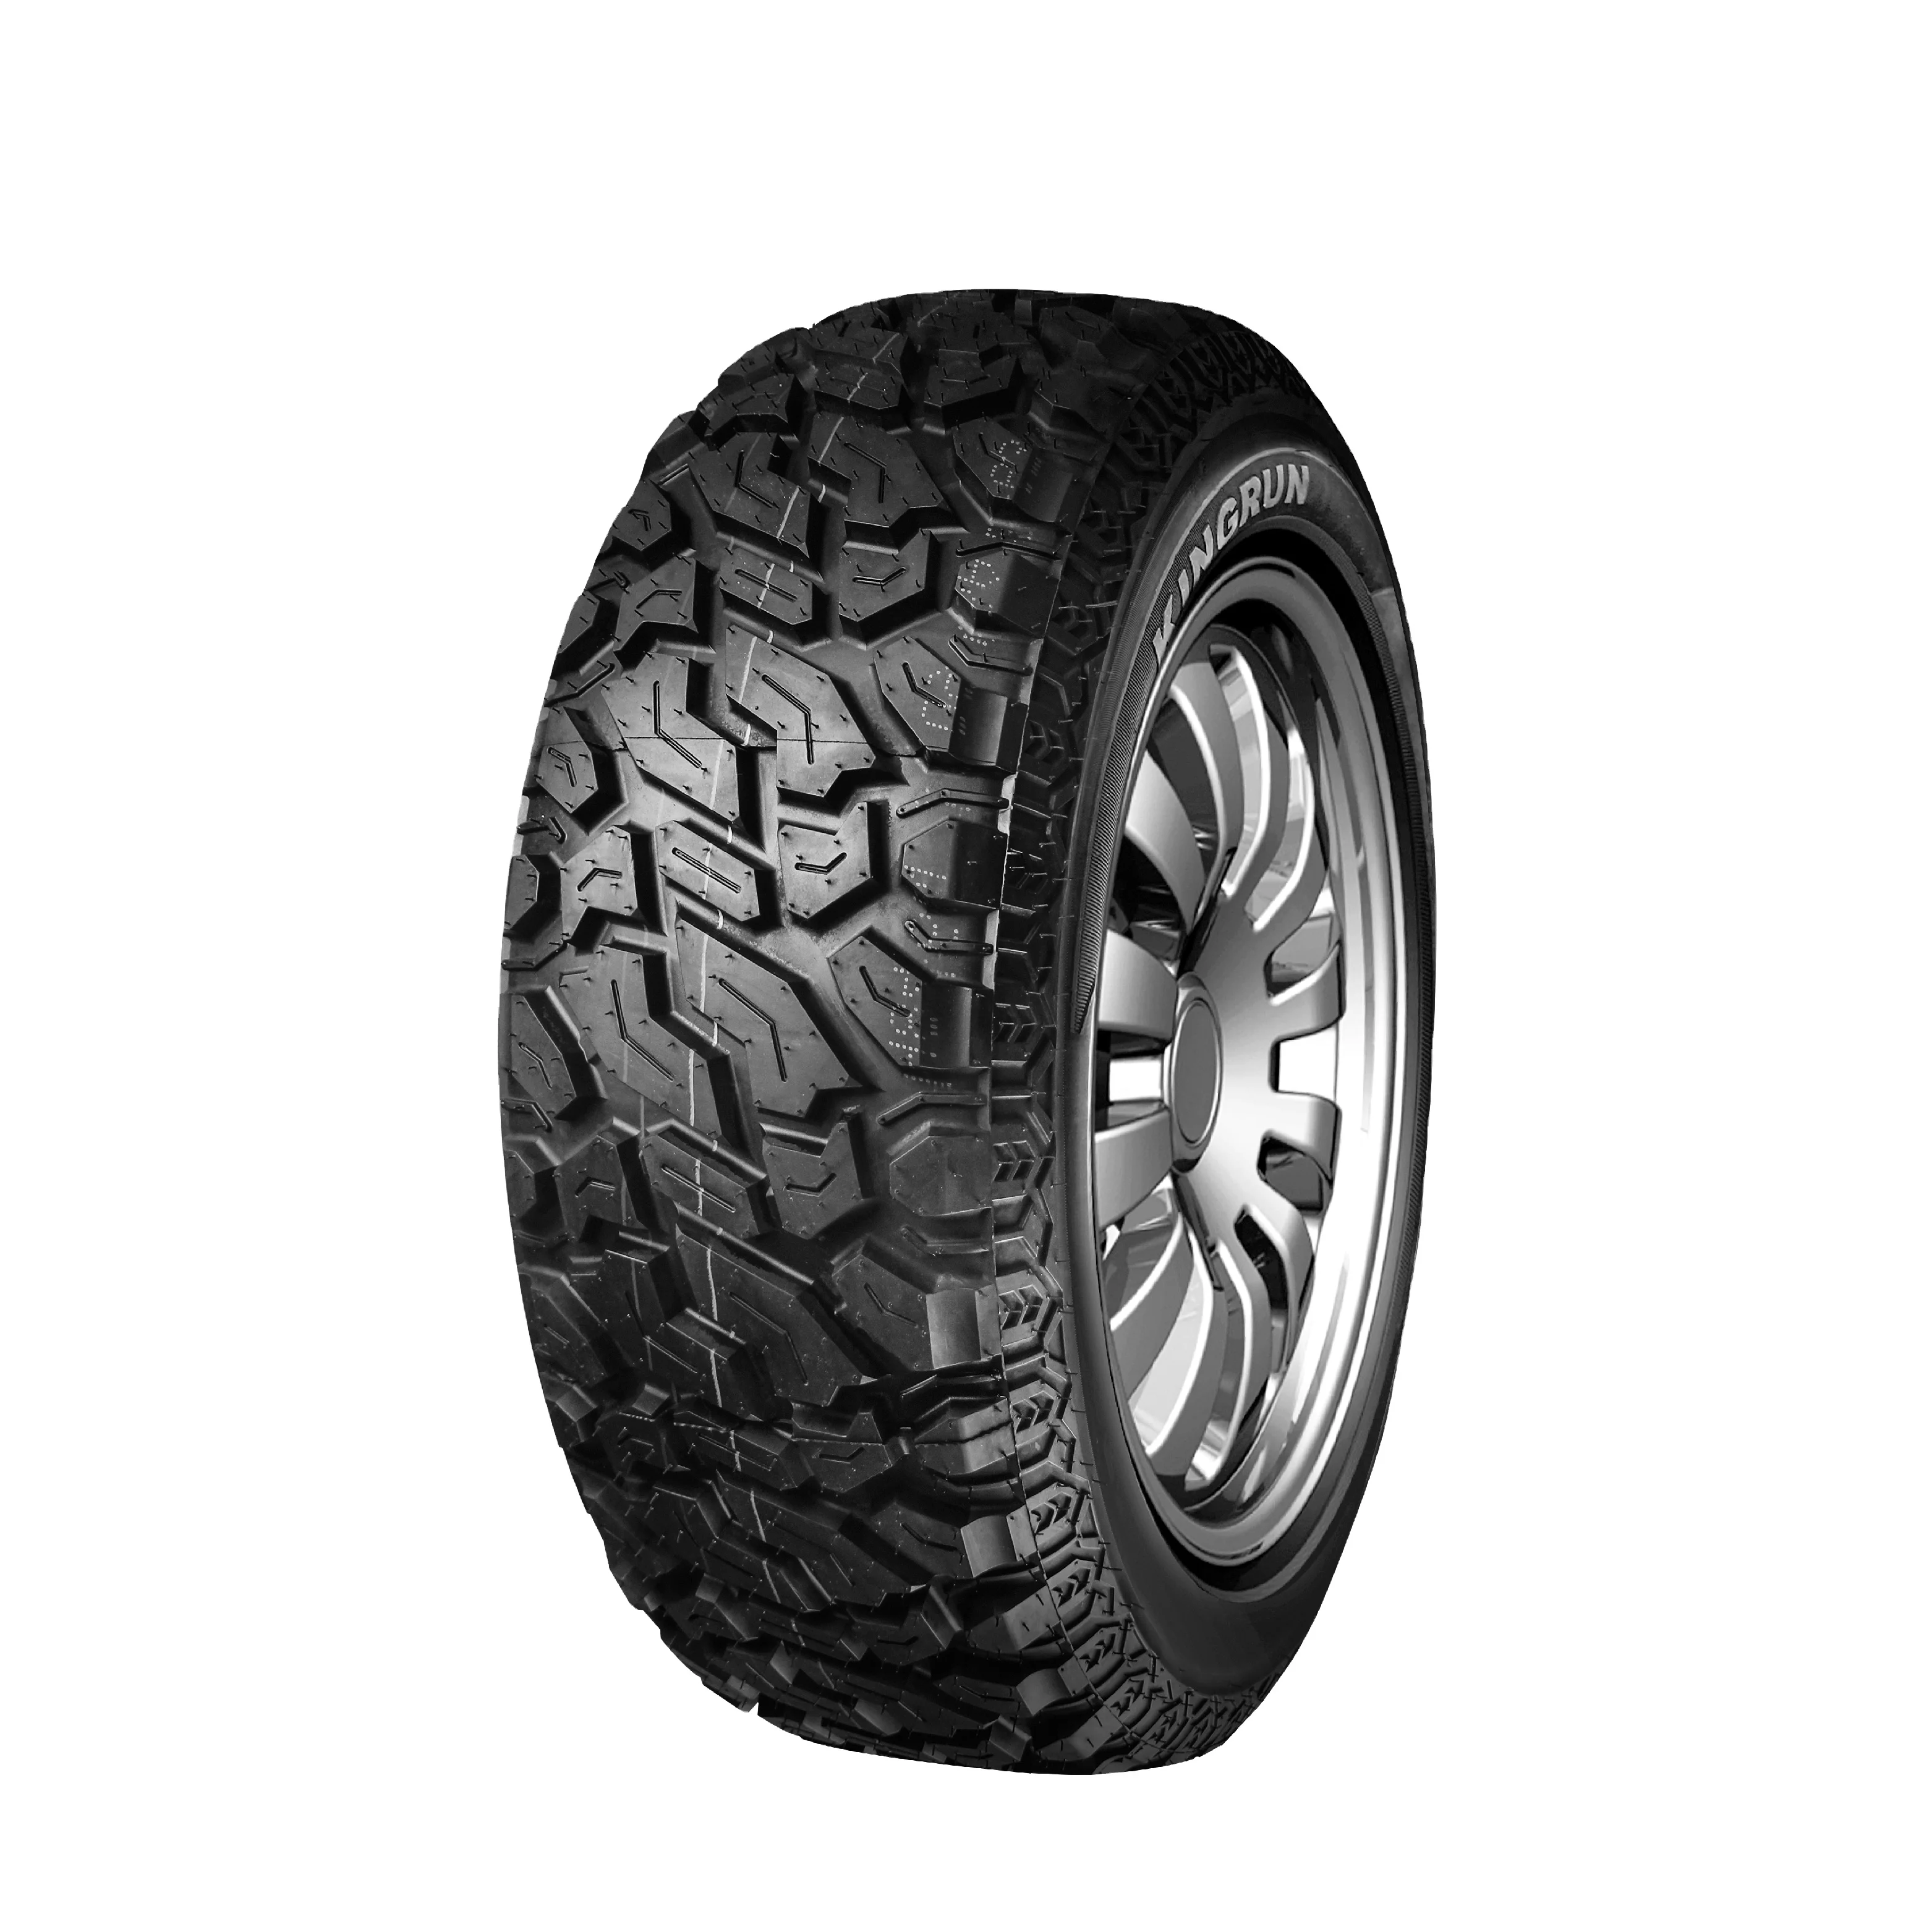 1 2 4 5 2657016 Hifly AT601 A/T 265 70 16 AT All Terrain SUV 4x4 265/70r16 112T 